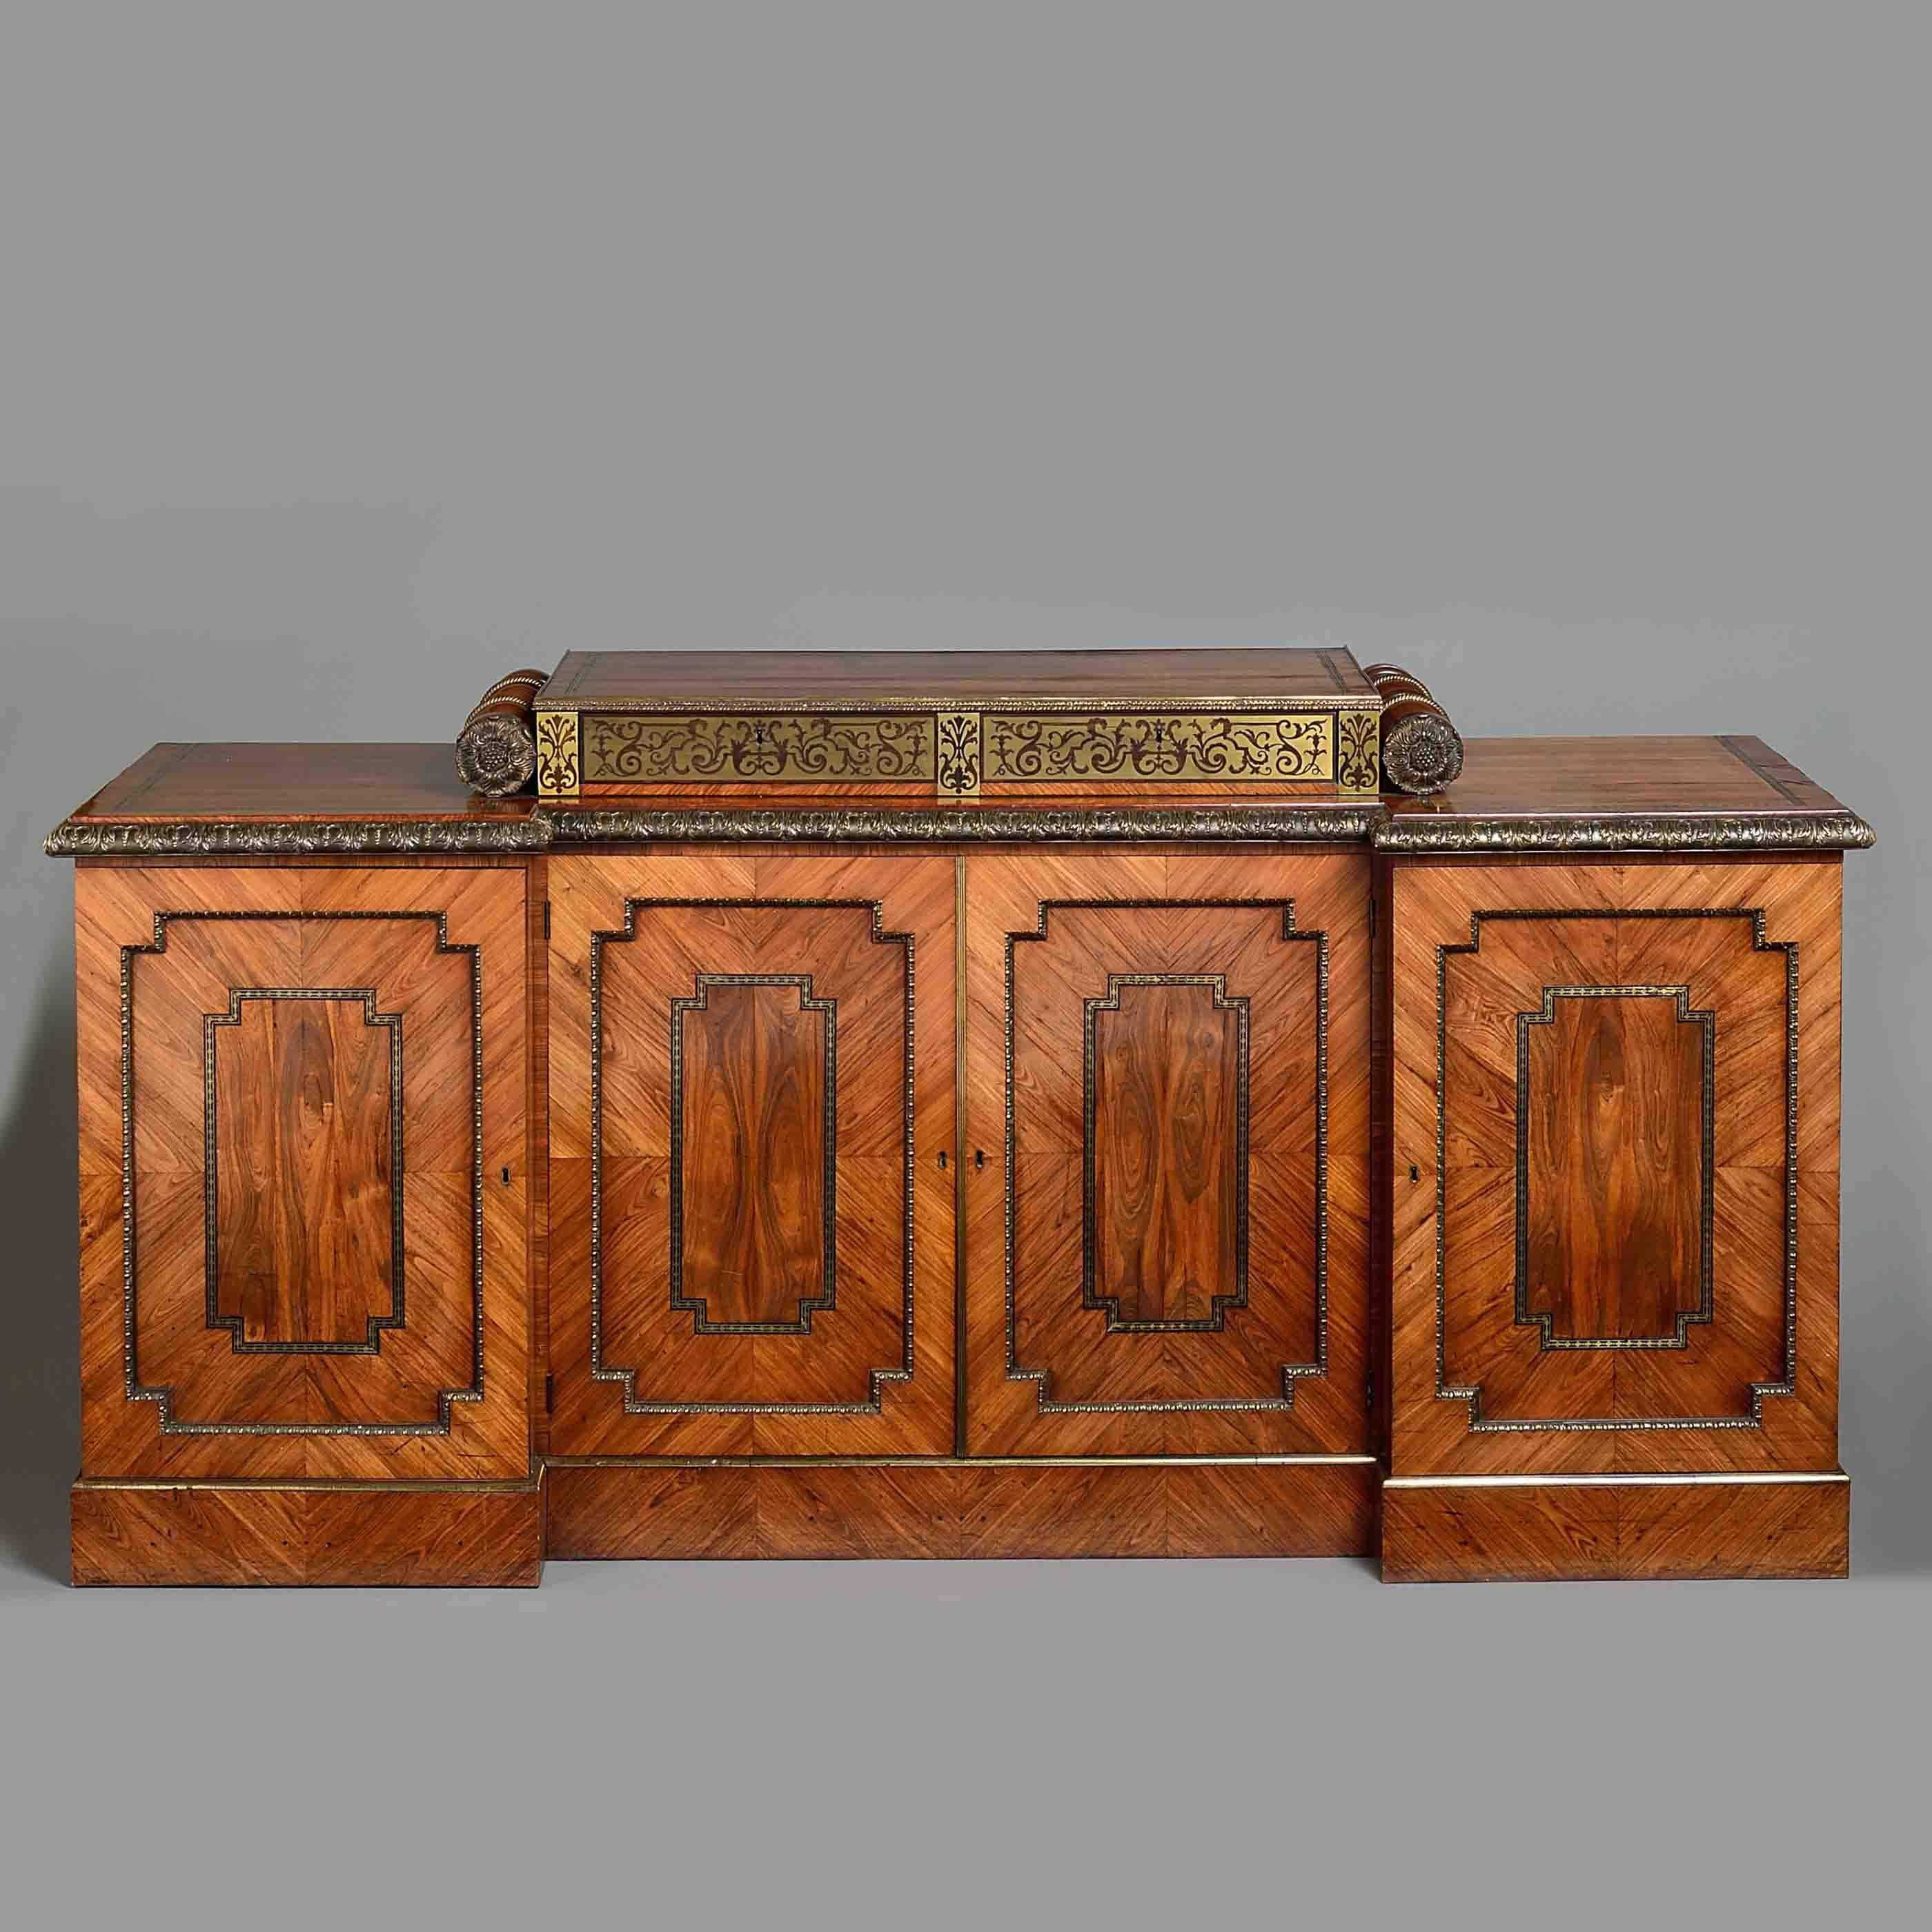 A magnificent Regency ormolu-mounted and brass-inlaid kingwood side cabinet in the manner of George Bullock, circa 1820.

The stepped top fitted with two brass marquetry doors flanked by massive turned balusters applied with paterae, the inverted